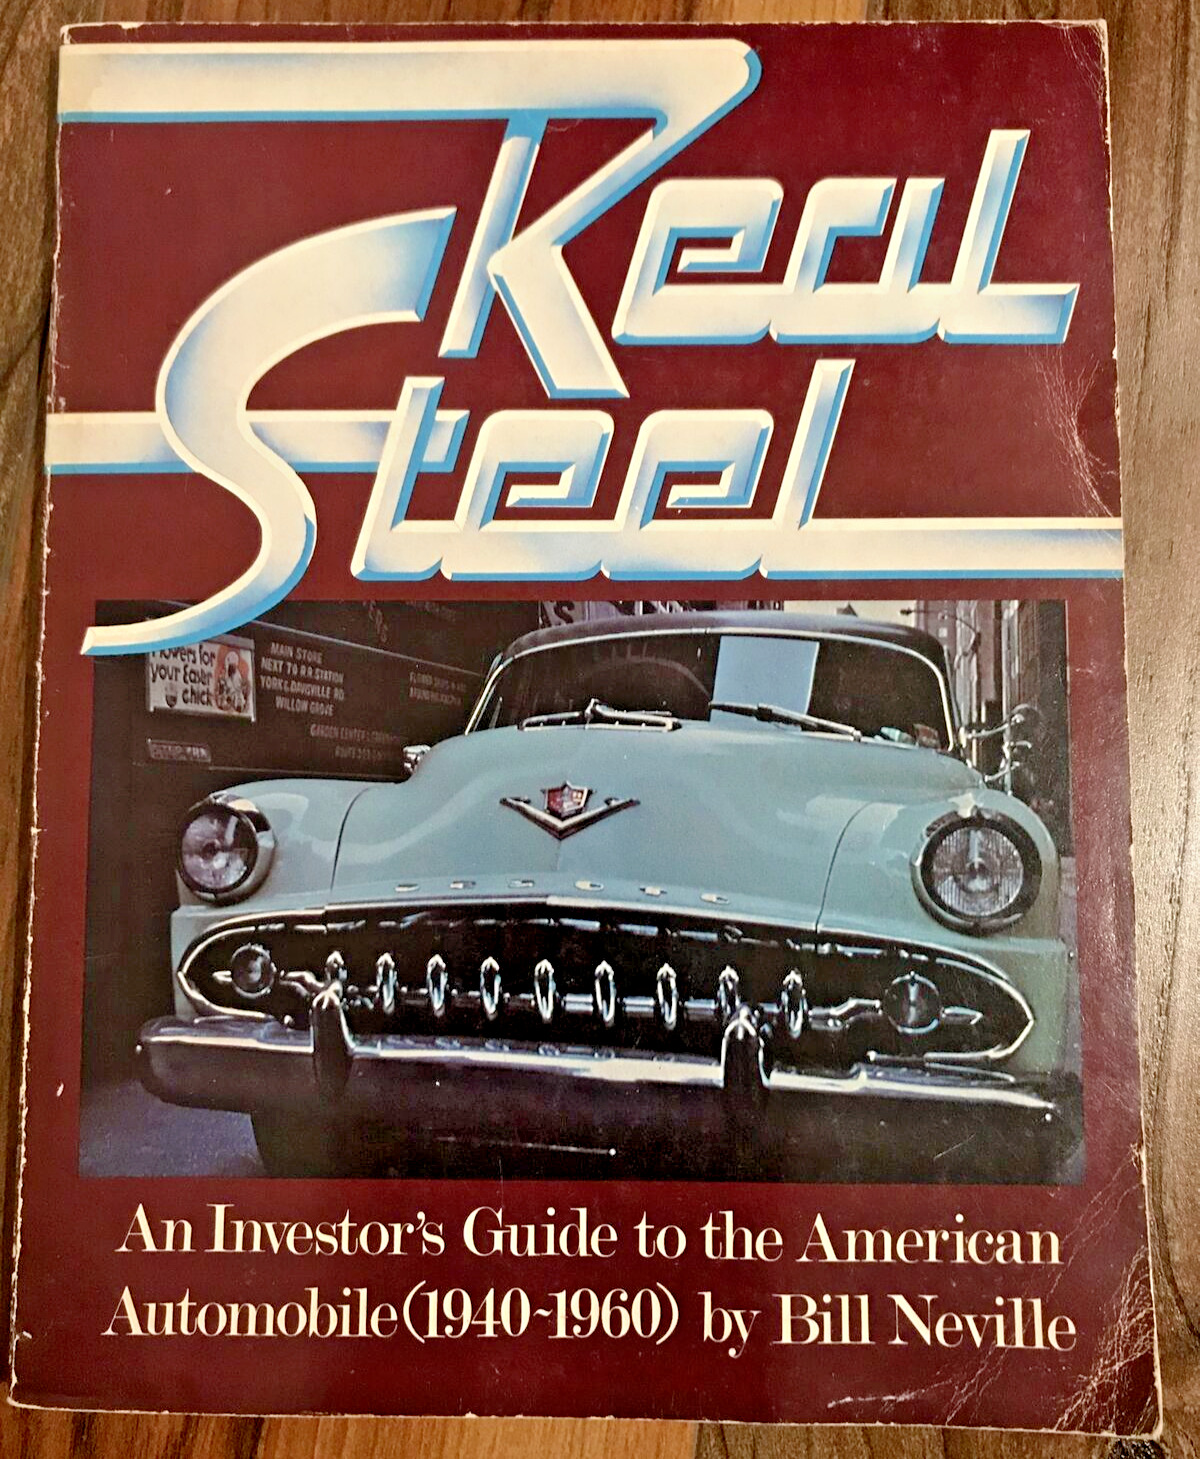 Real Steel - Investor's Guide American Automobile (1940-1960) by Neville (1975)